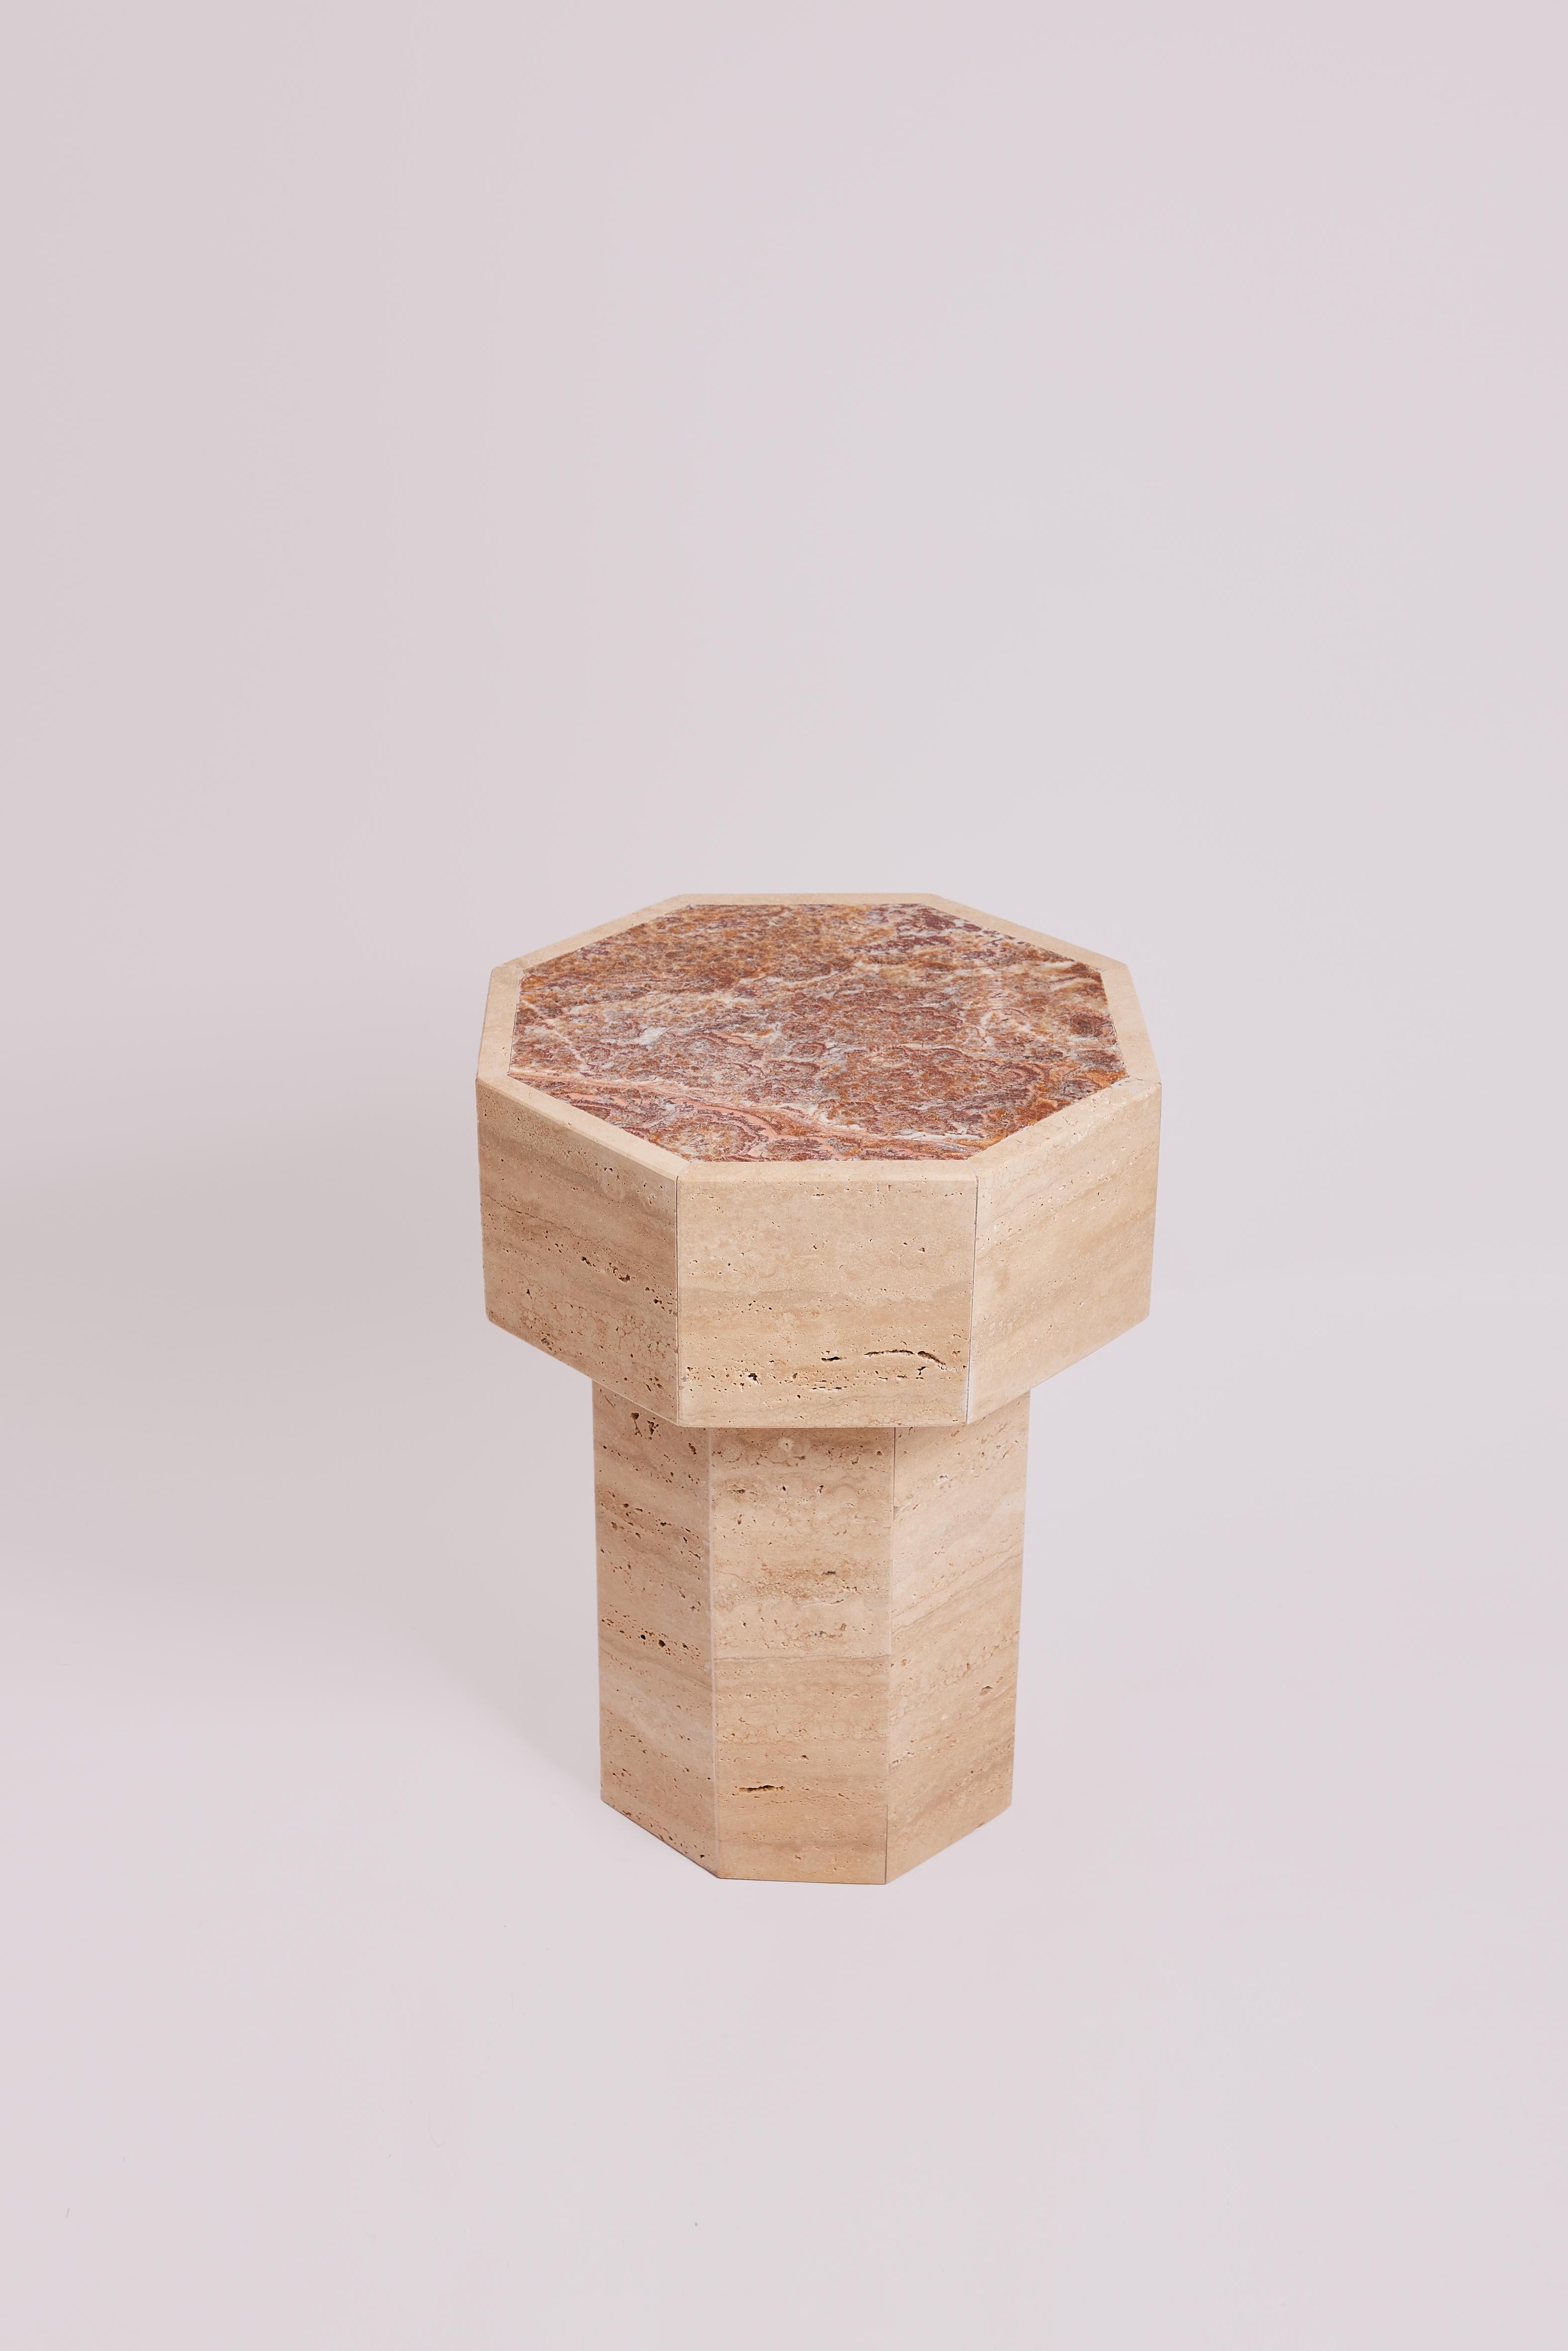 Red Onyx Gisele Side Table by Studio Gaia Paris
Dimensions: ⌀ 39 x H 50 cm
Materials: Red Onyx and Travertine

The Gisèle side table, in onyx and travertine, features two types of natural stones known for their unique beauty and durable properties.